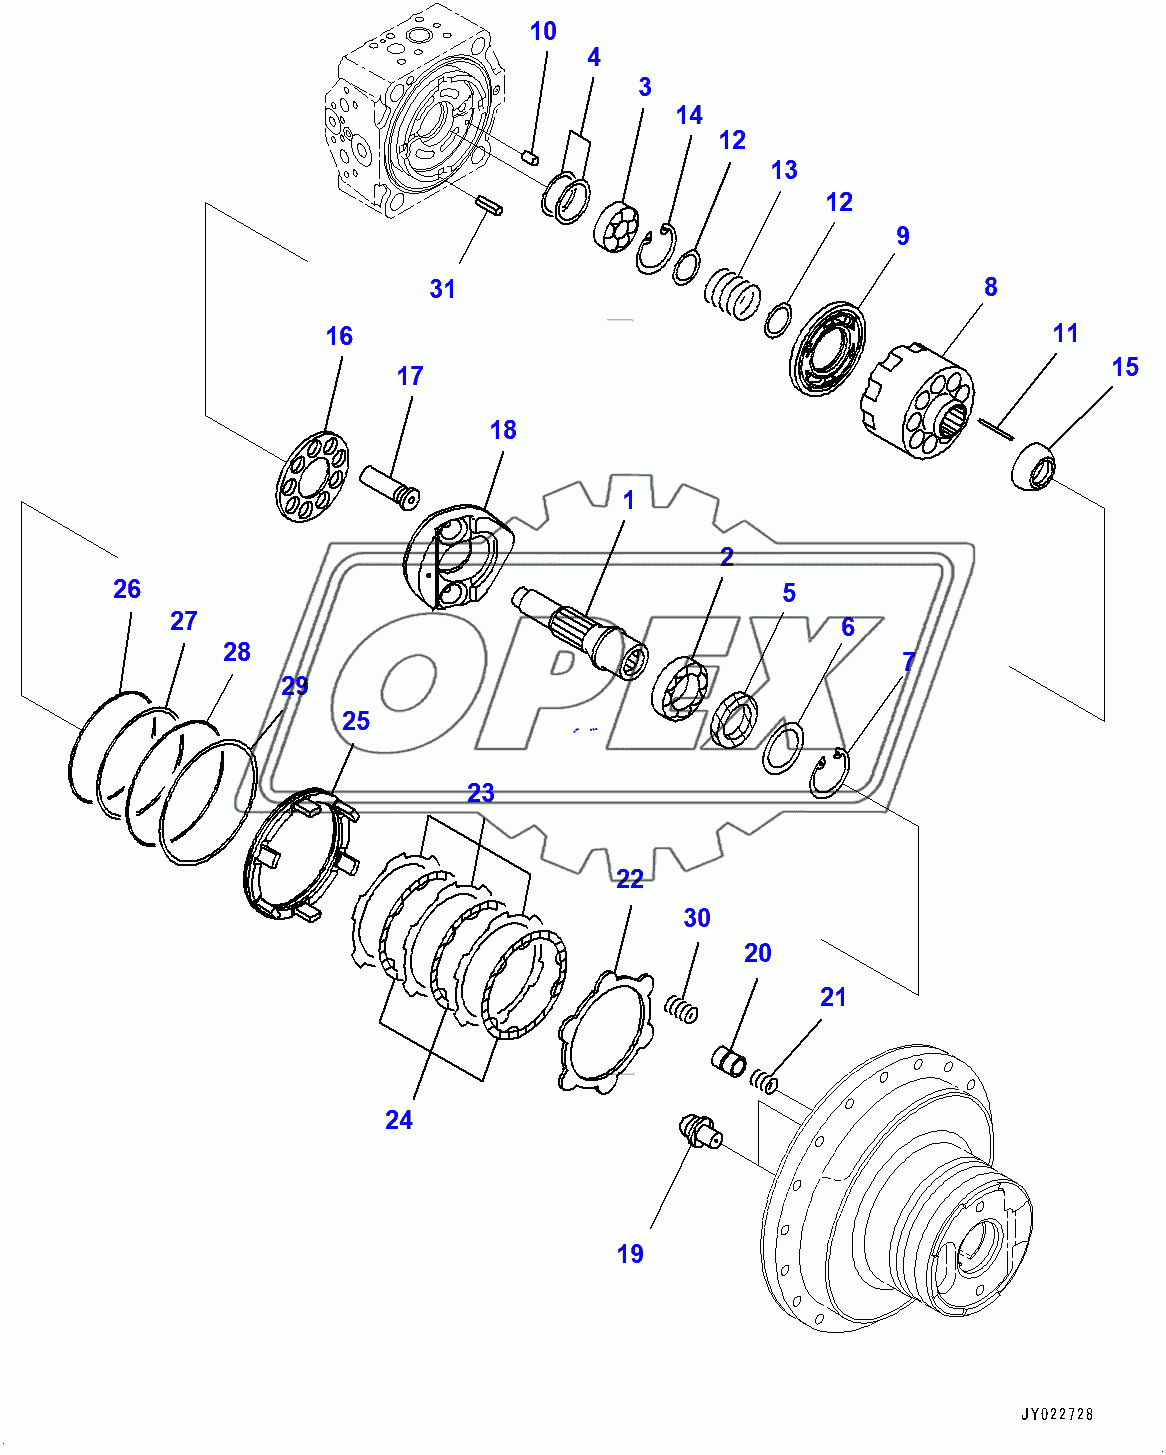  Travel Motor and Final Drive, Travel Motor, R.H. (2/2) (400127-)